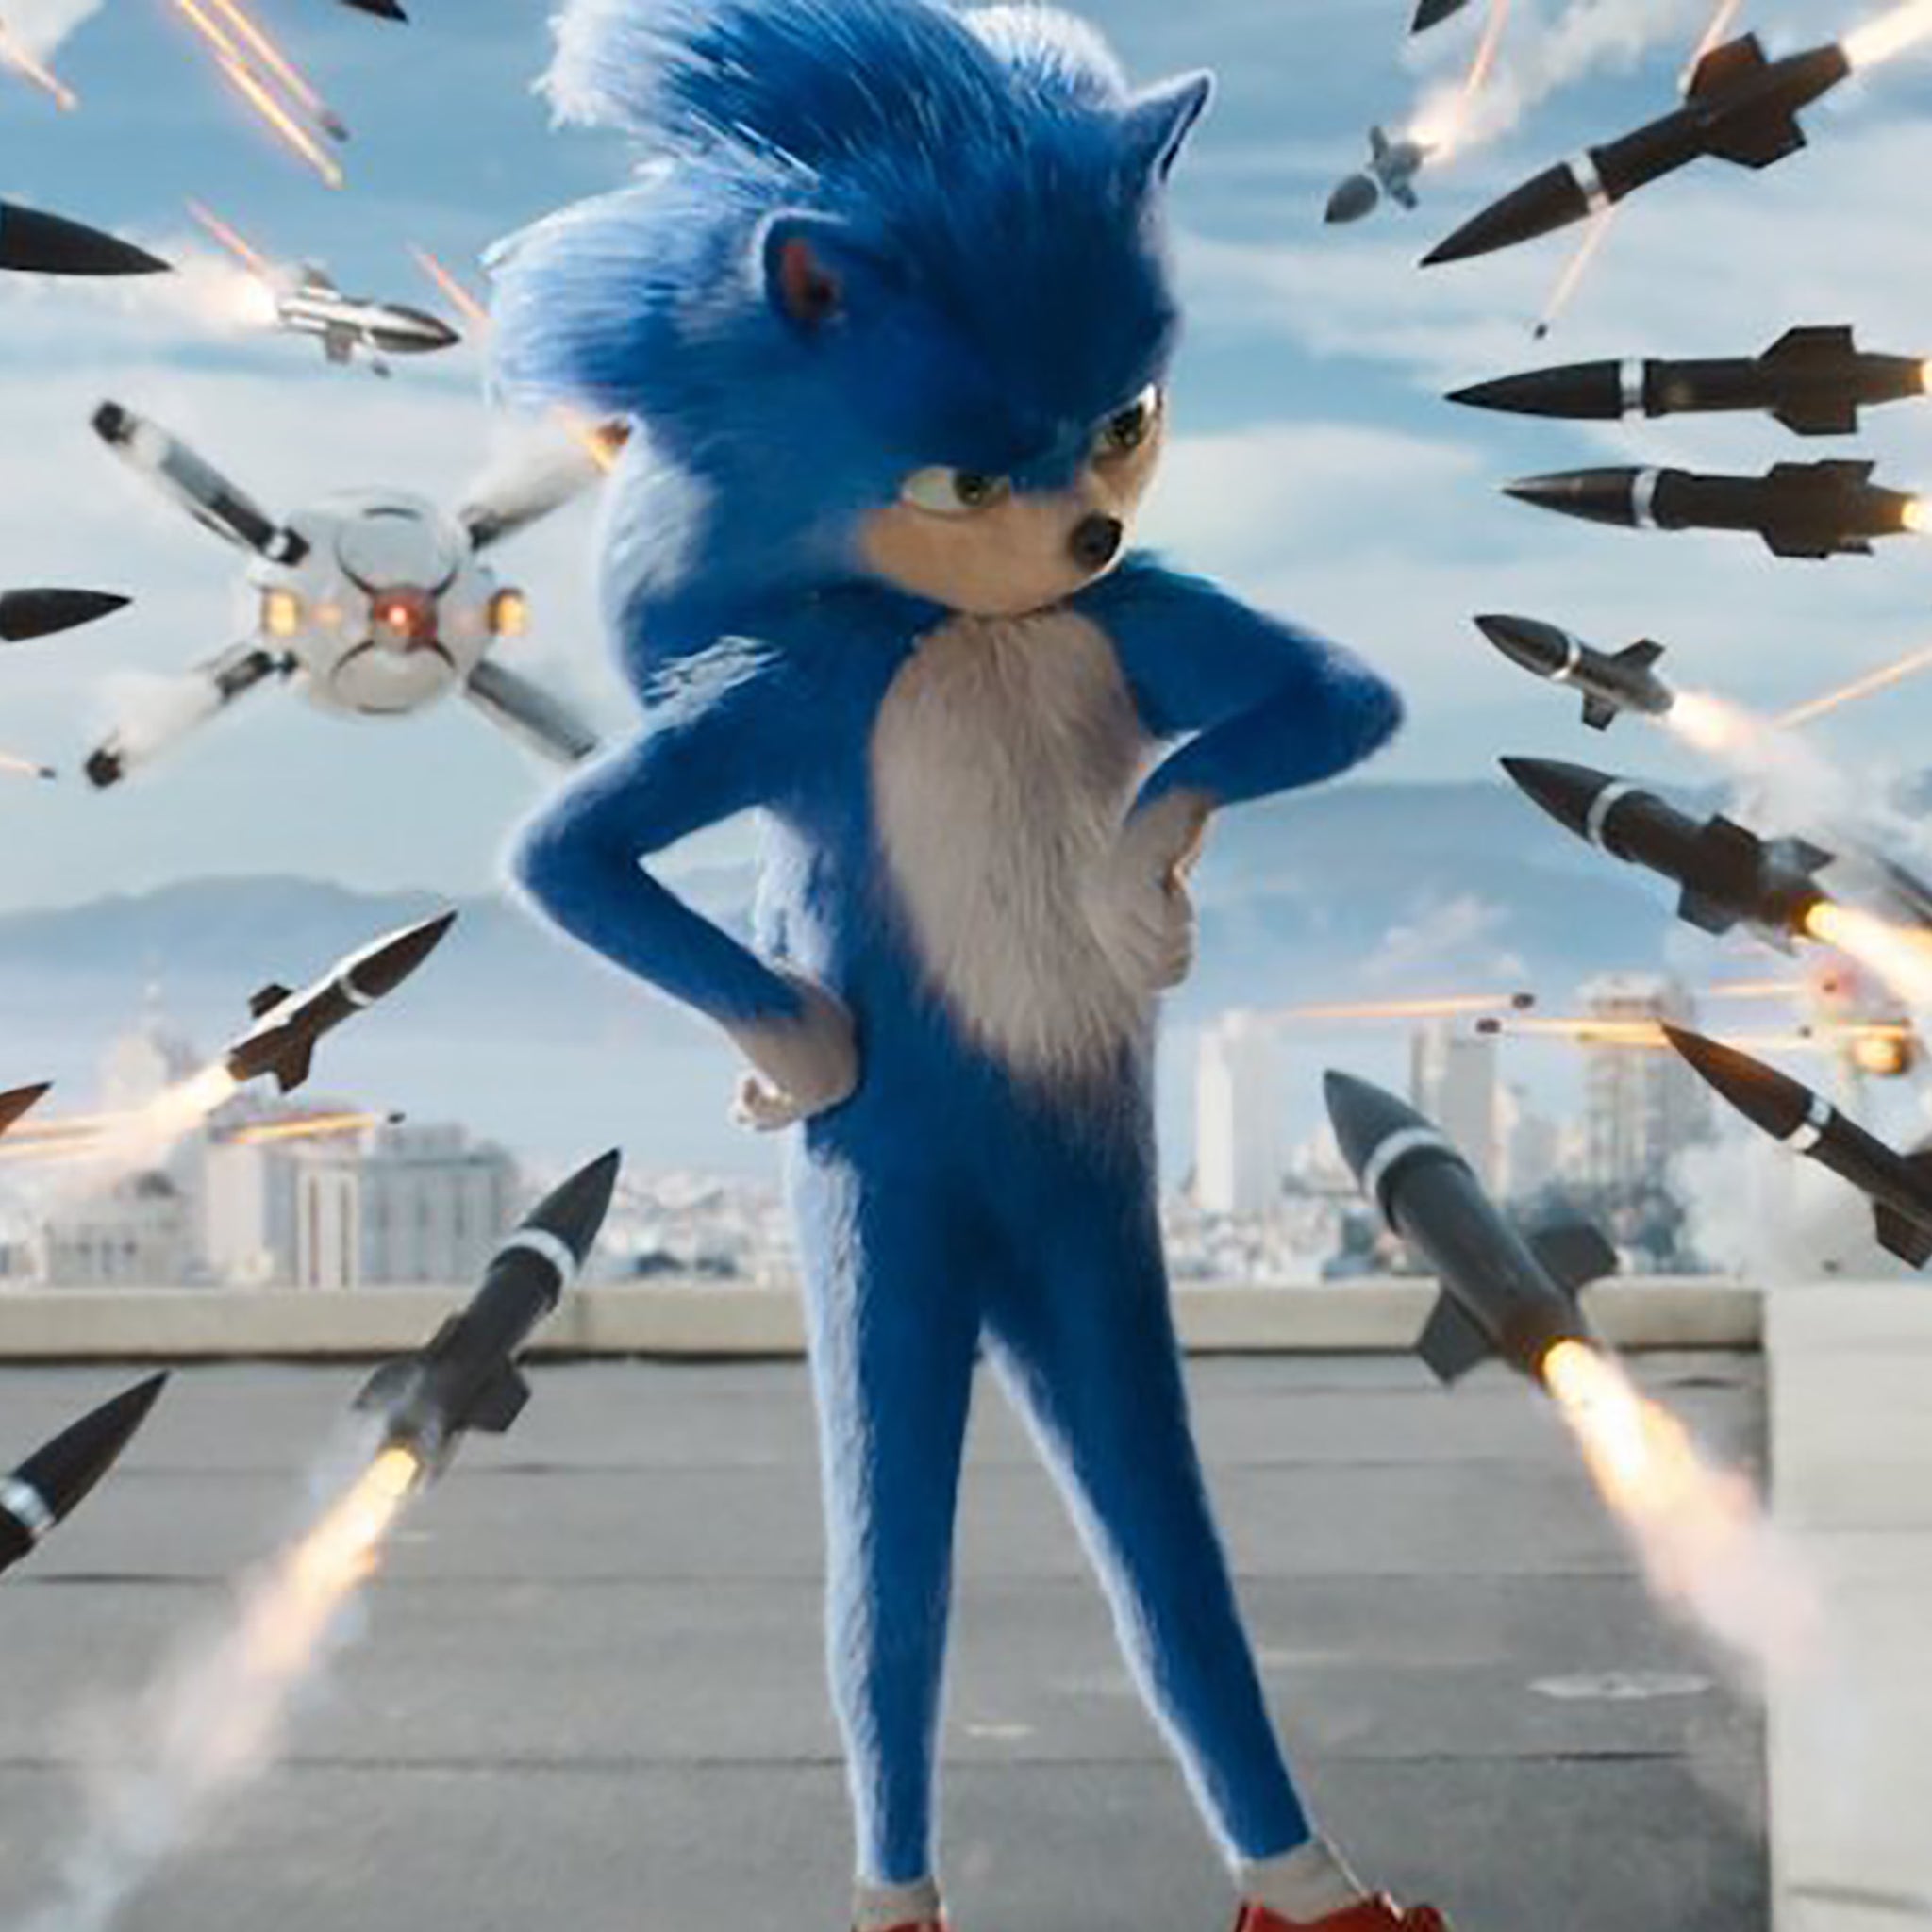 The latest Sonic movie trailer gives us a look at a baby Sonic